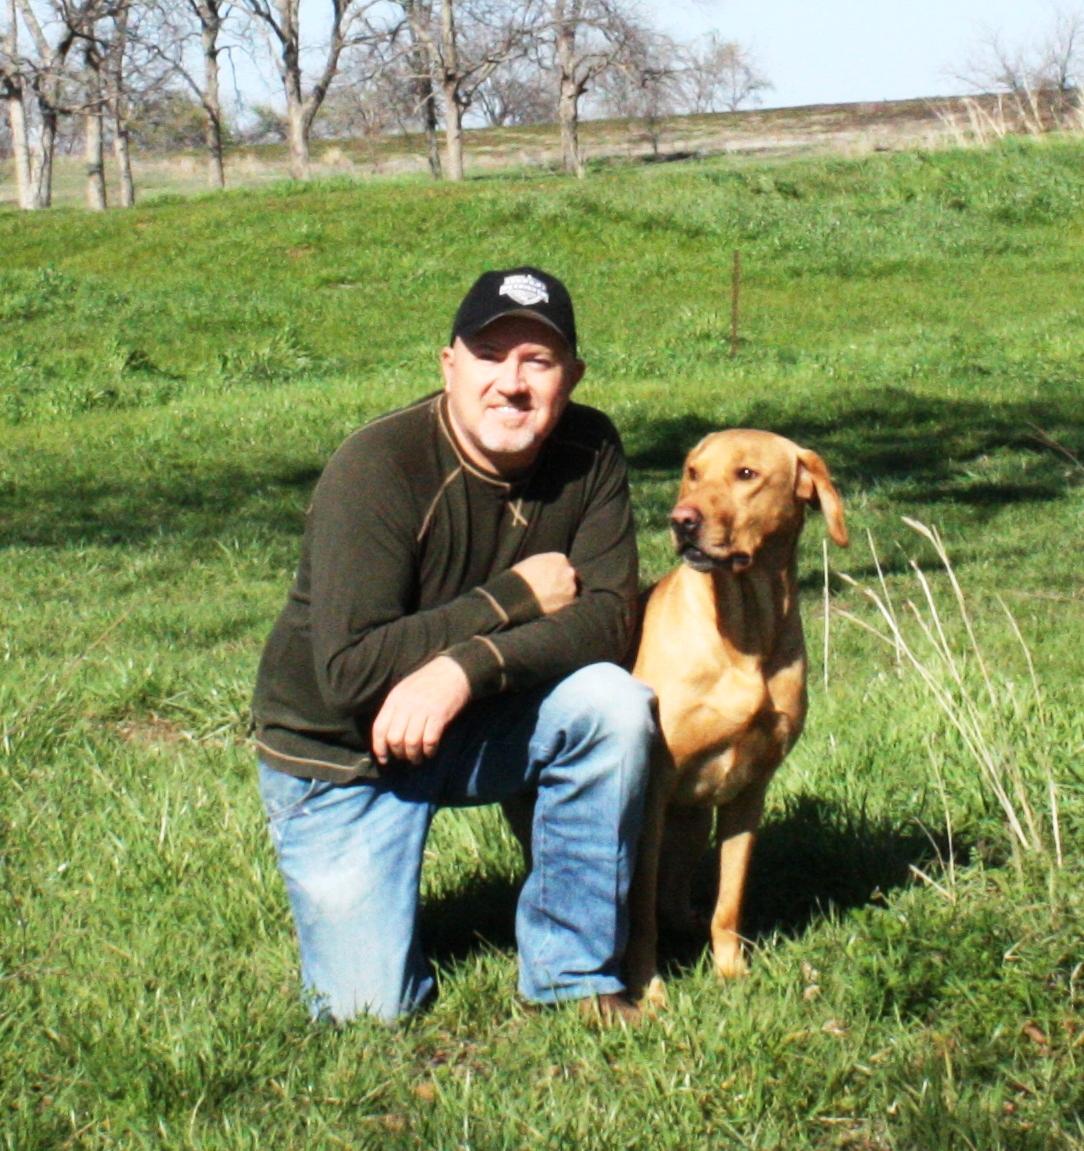 Greg McGuffin has been professionally training hunting dogs for 8 years.  3 years ago he and his family sold their house in Tulsa, Oklahoma and decided to dive head first into Retriever Training.  They now live on the 2,000 acre family ranch in south central Oklahoma where Greg, his wife,...